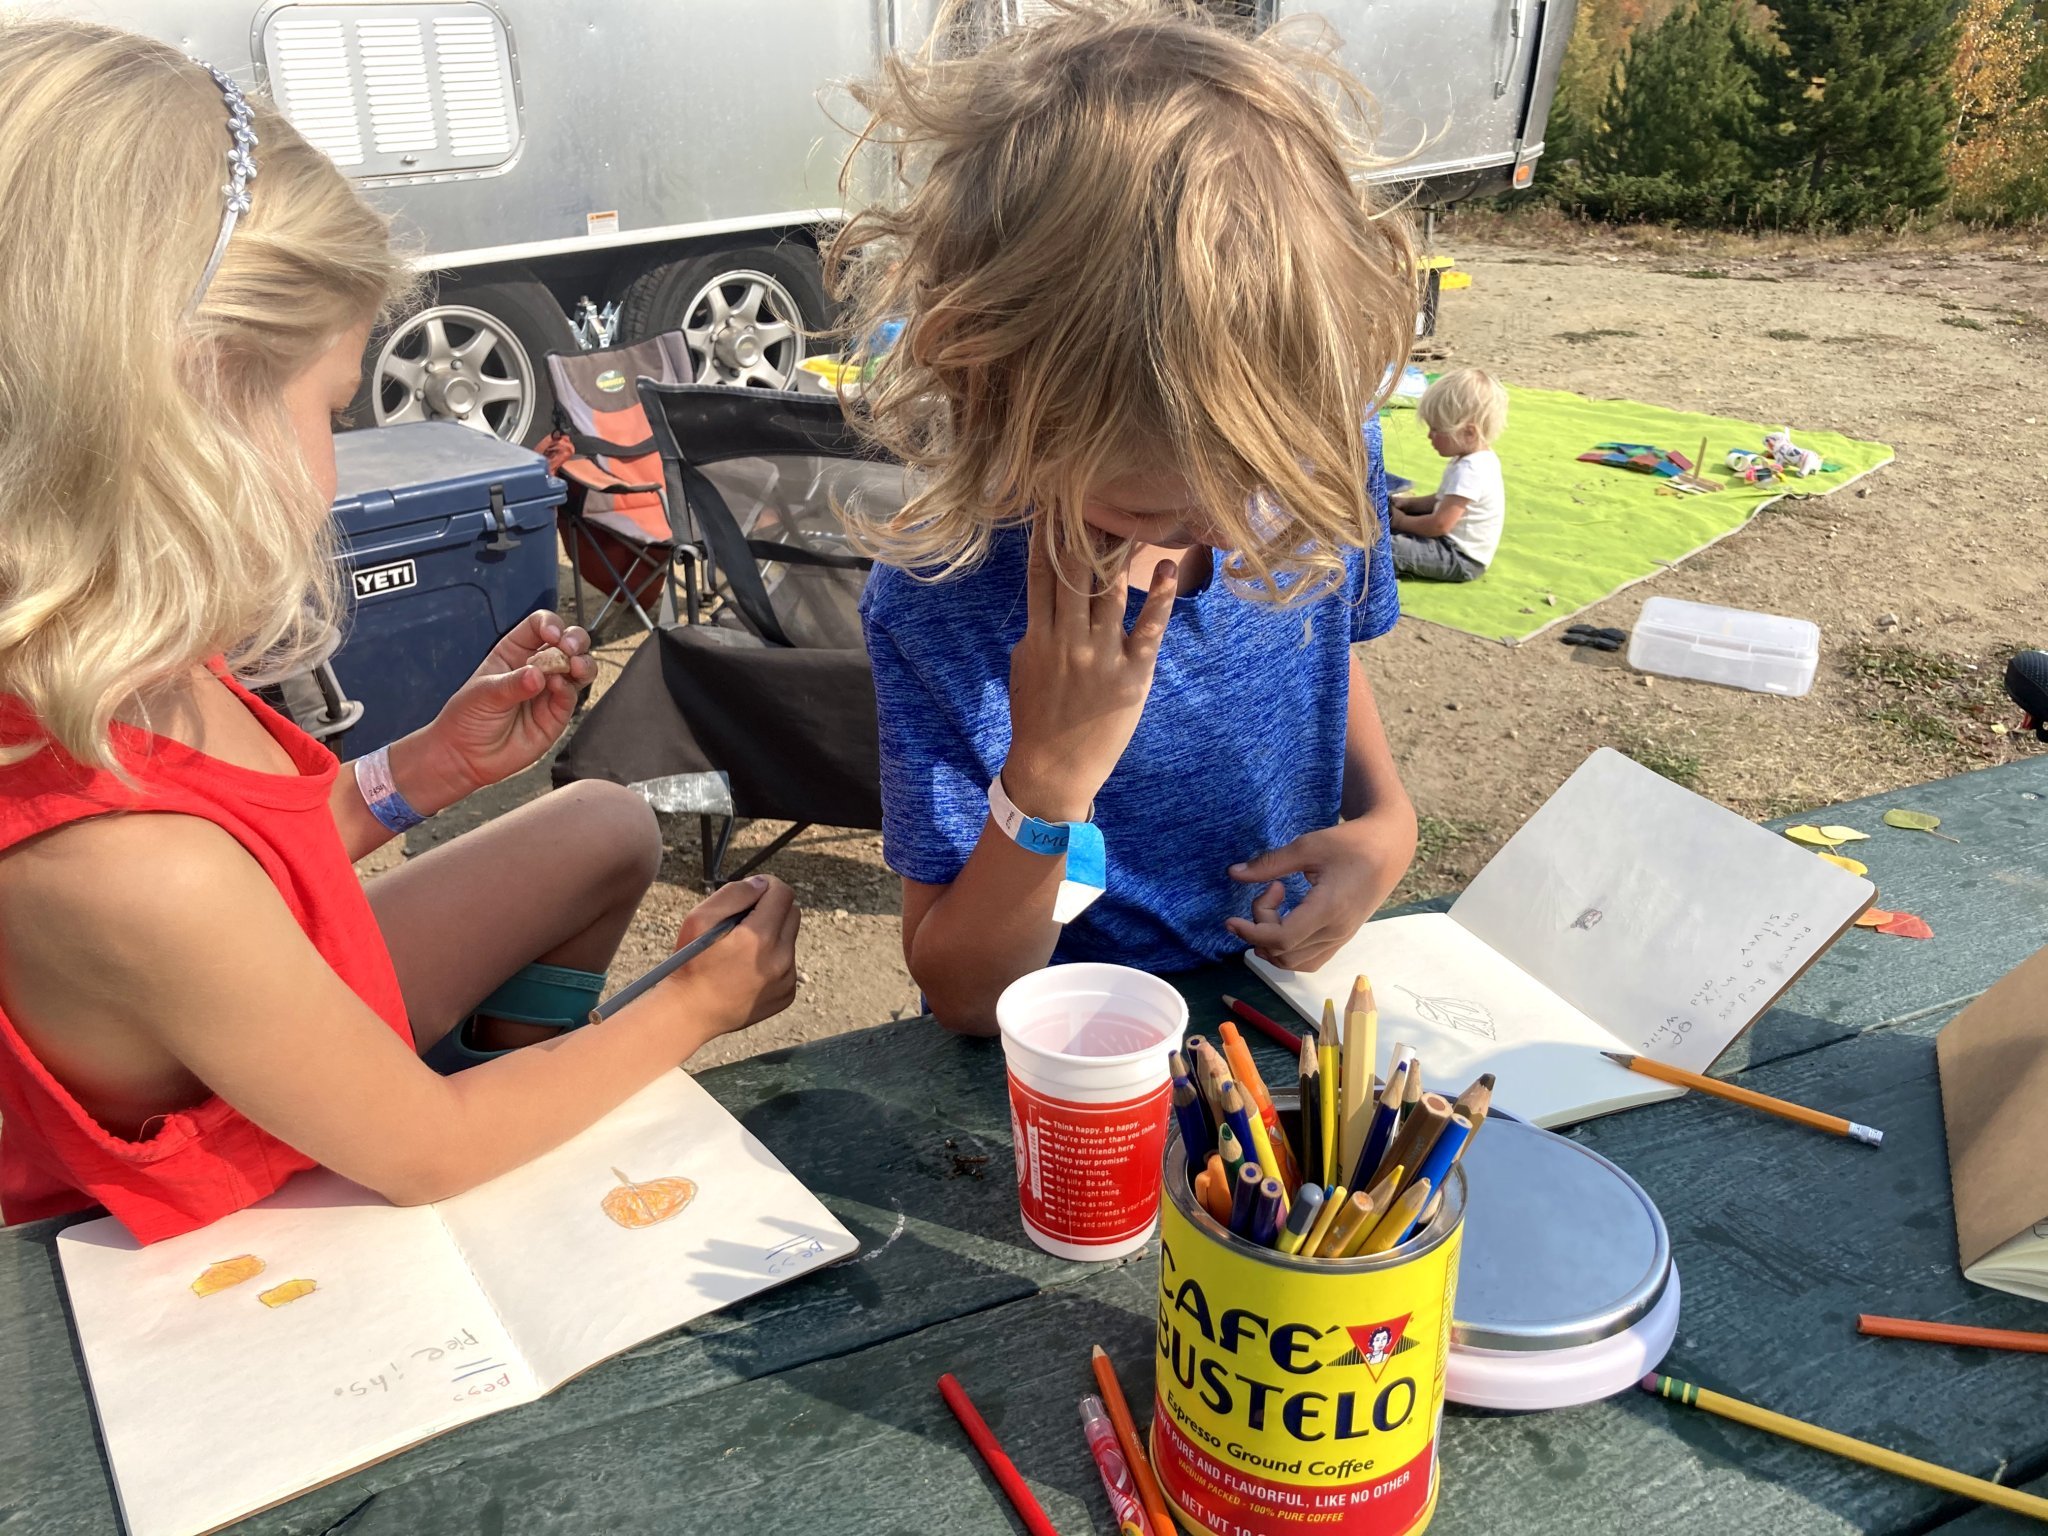 Two kids sitting at a table outside of their Airstream travel trailer while doing crafts.